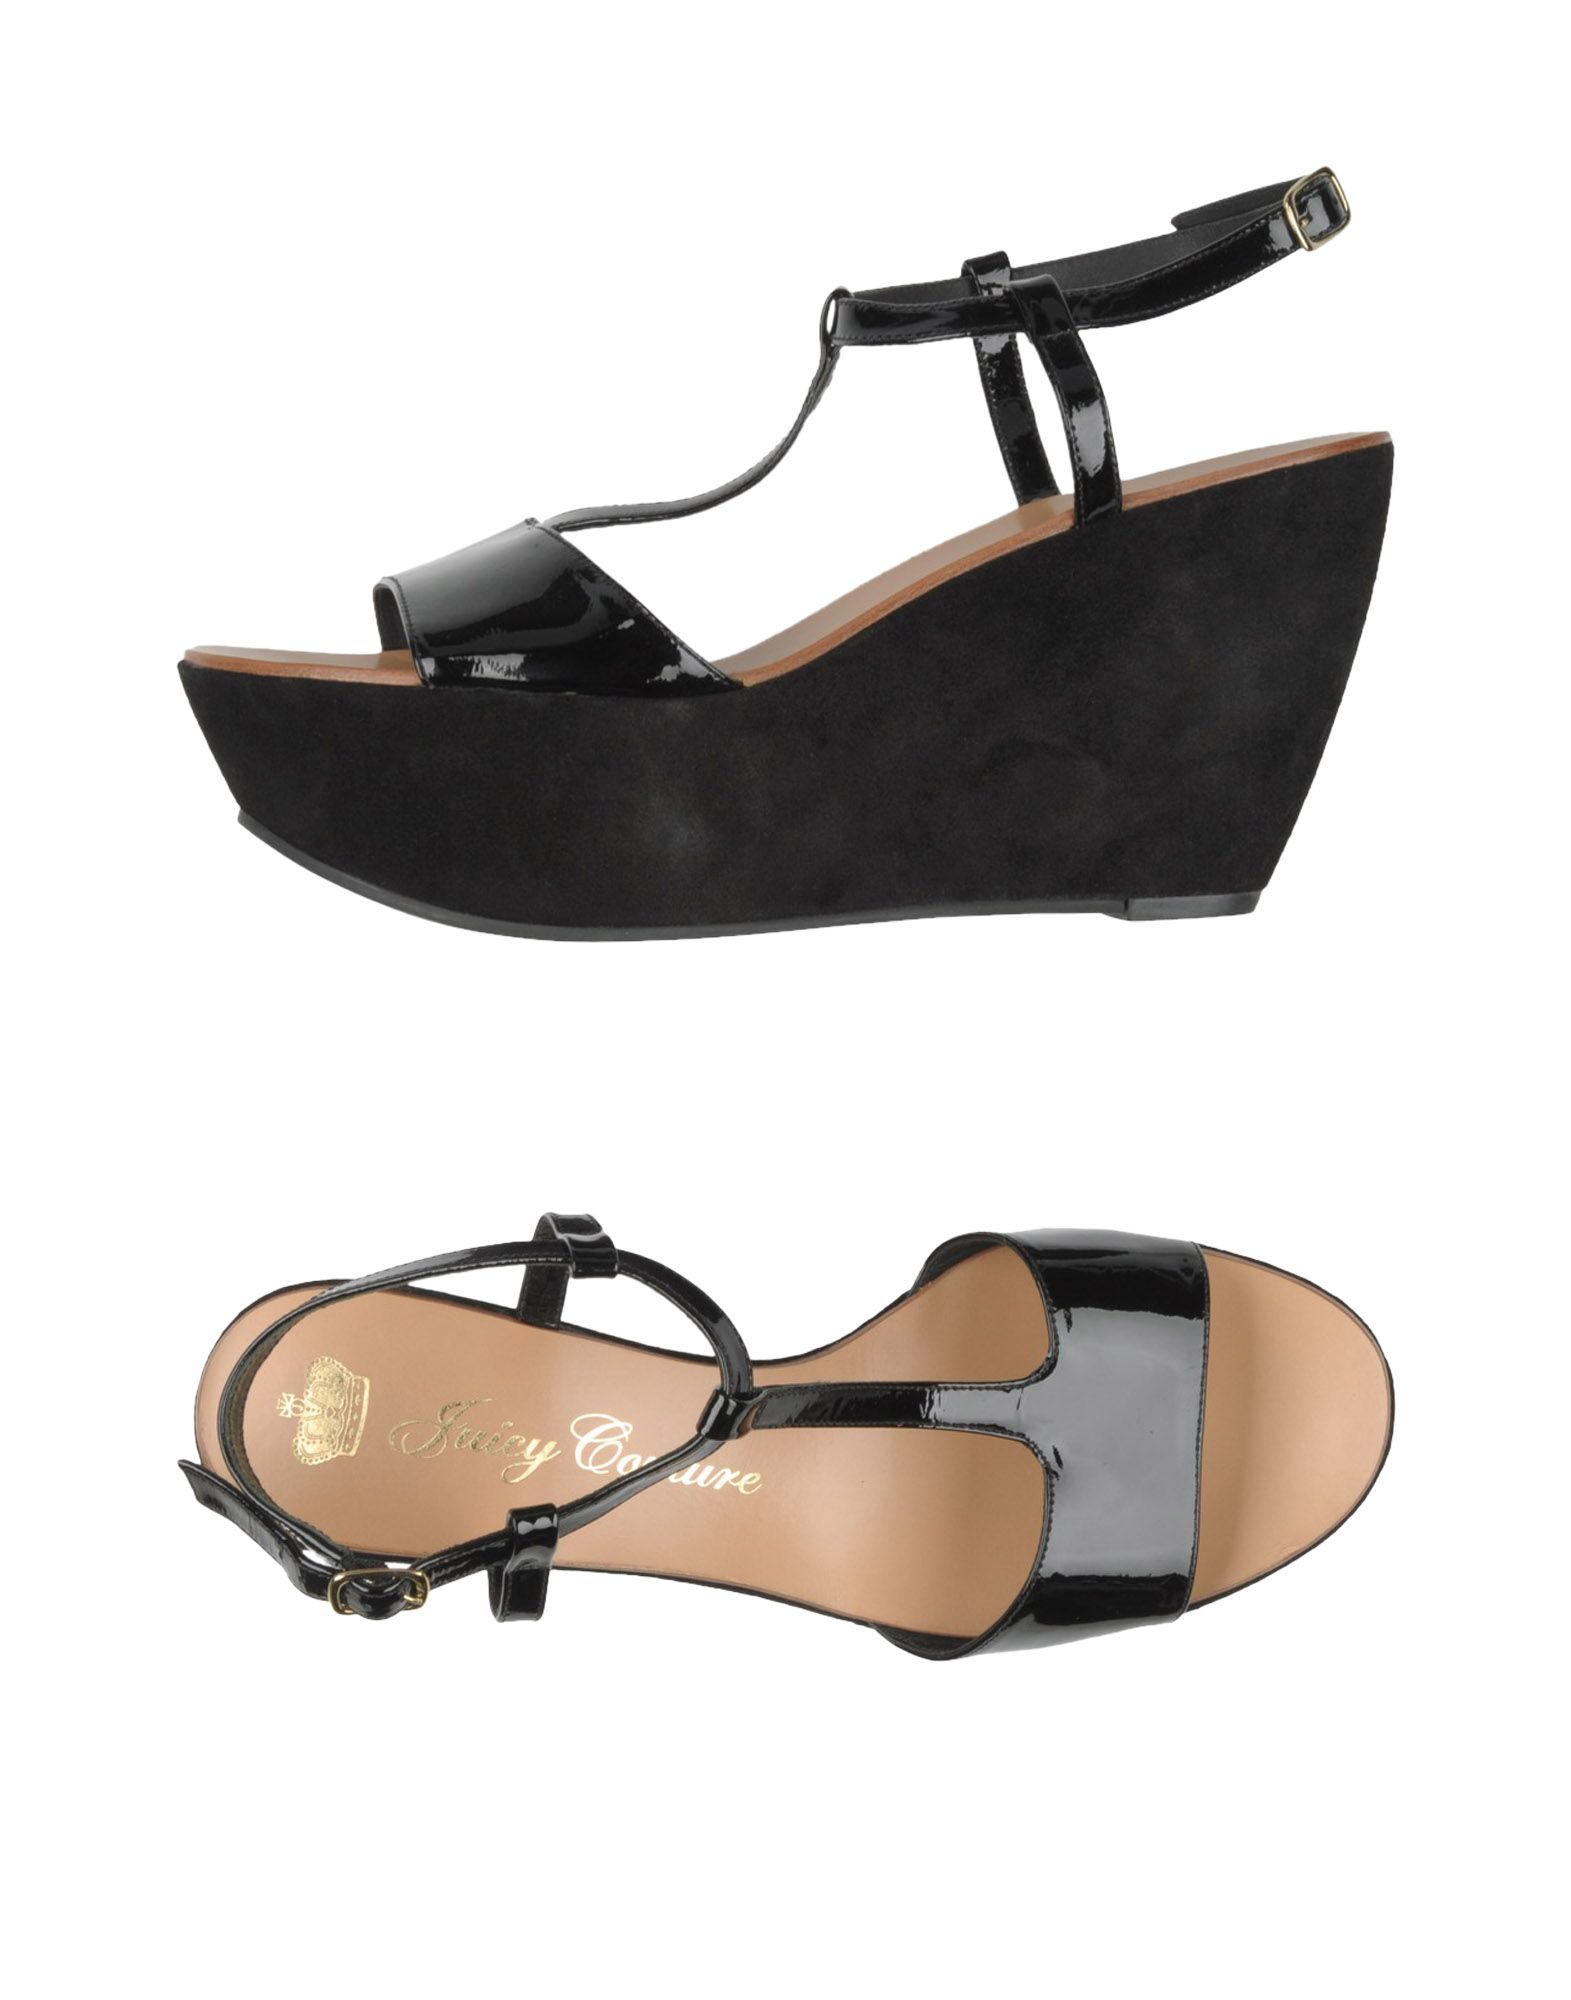 Juicy Couture Leather Sandals in Black Lyst